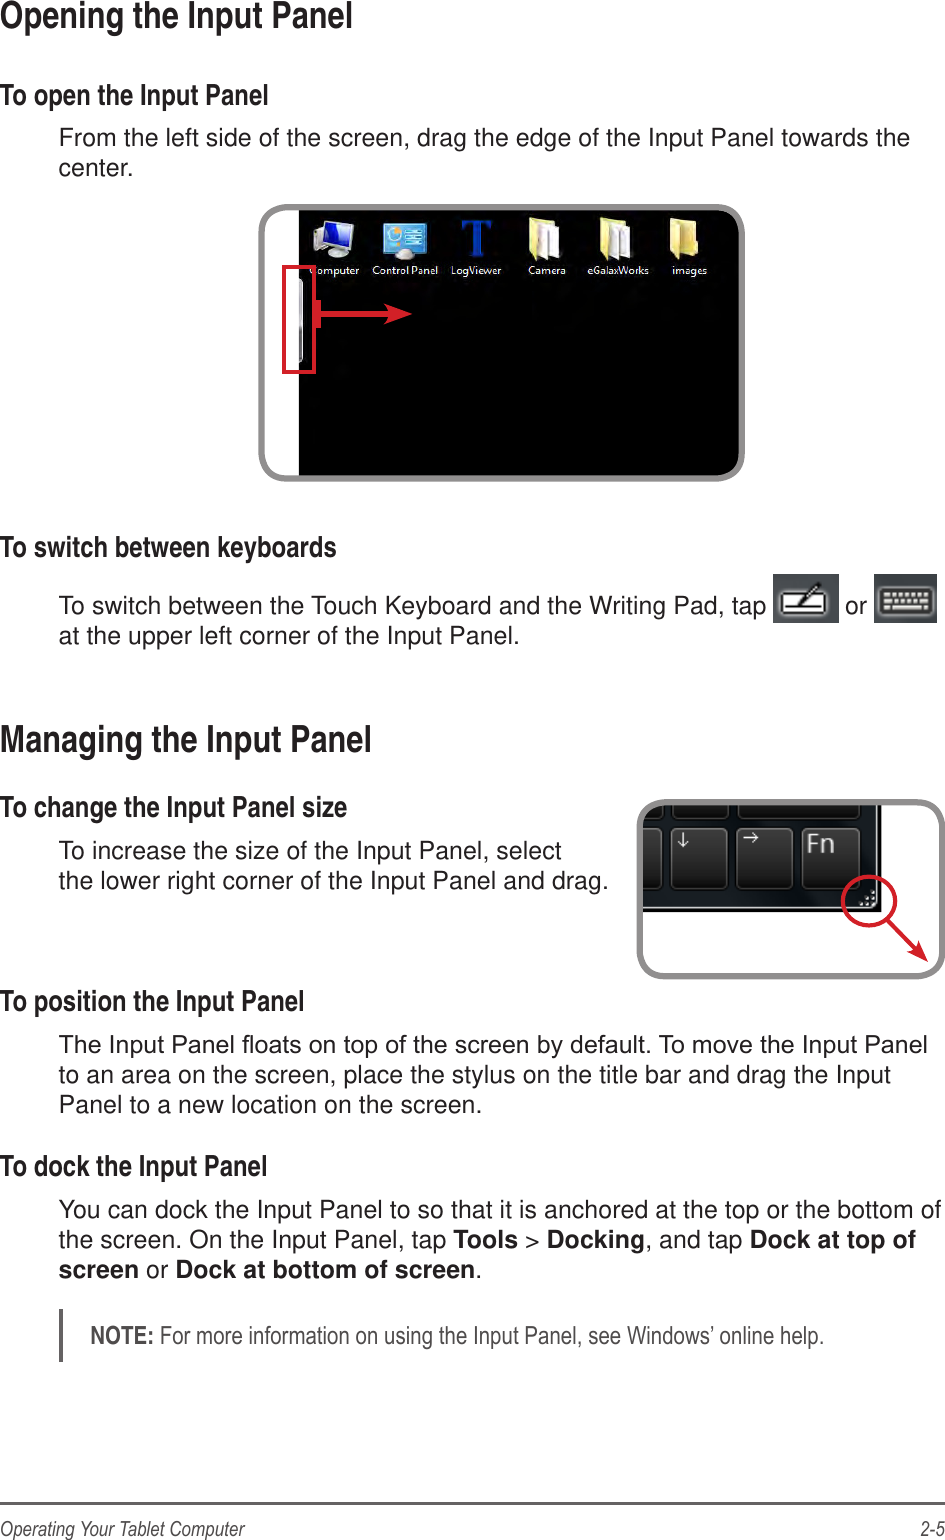 2-5Operating Your Tablet ComputerOpening the Input PanelTo open the Input PanelFrom the left side of the screen, drag the edge of the Input Panel towards the center.To switch between keyboardsTo switch between the Touch Keyboard and the Writing Pad, tap   or   at the upper left corner of the Input Panel.Managing the Input PanelTo change the Input Panel sizeTo increase the size of the Input Panel, select  the lower right corner of the Input Panel and drag. To position the Input Panelto an area on the screen, place the stylus on the title bar and drag the Input Panel to a new location on the screen.To dock the Input PanelYou can dock the Input Panel to so that it is anchored at the top or the bottom of the screen. On the Input Panel, tap Tools &gt; Docking, and tap Dock at top of screen or Dock at bottom of screen.NOTE: 